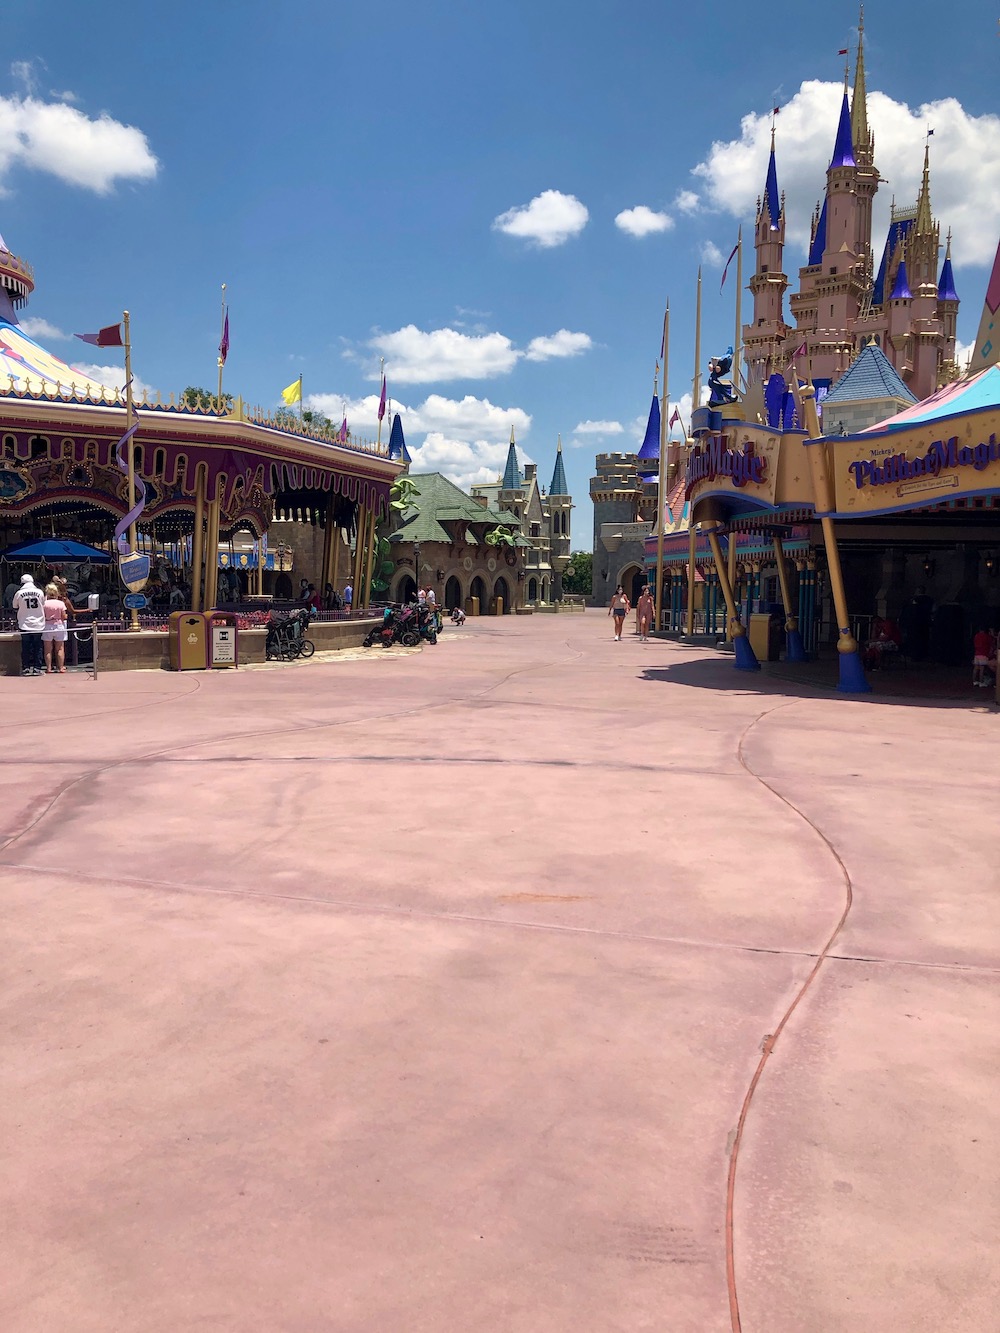 Walt Disney World has finally reopened! Here's a very detailed guide of what your family can expect during your visit to Magic Kingdom. 